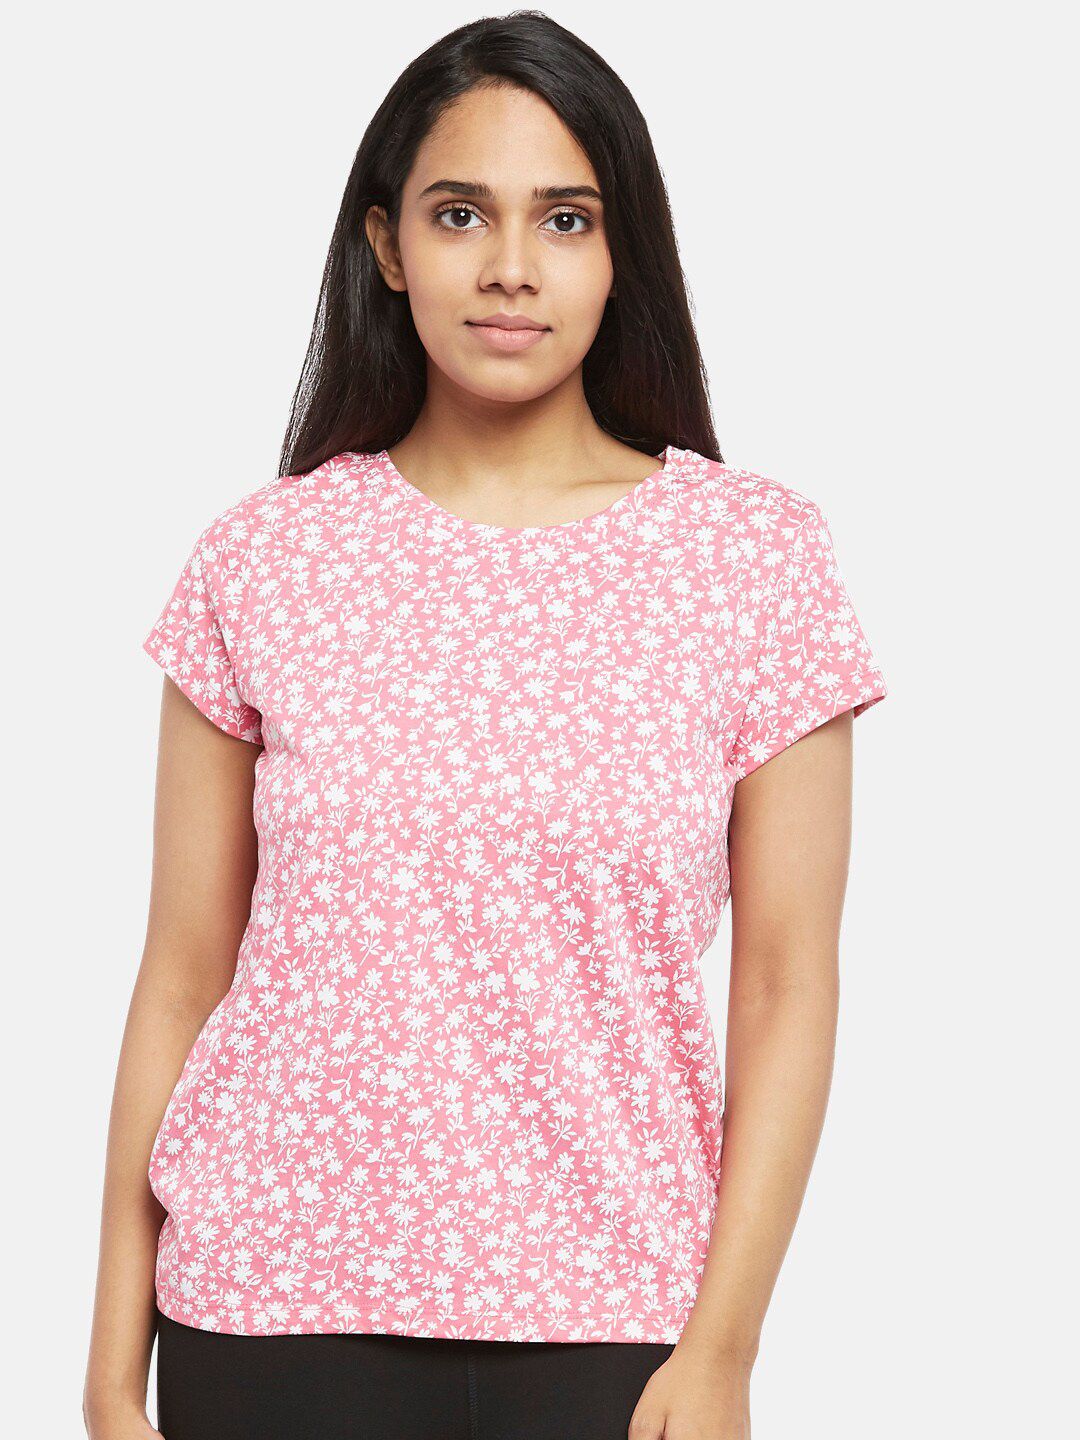 Dreamz by Pantaloons Women Pink & White Floral Printed Pure Cotton Lounge T-shirt Price in India